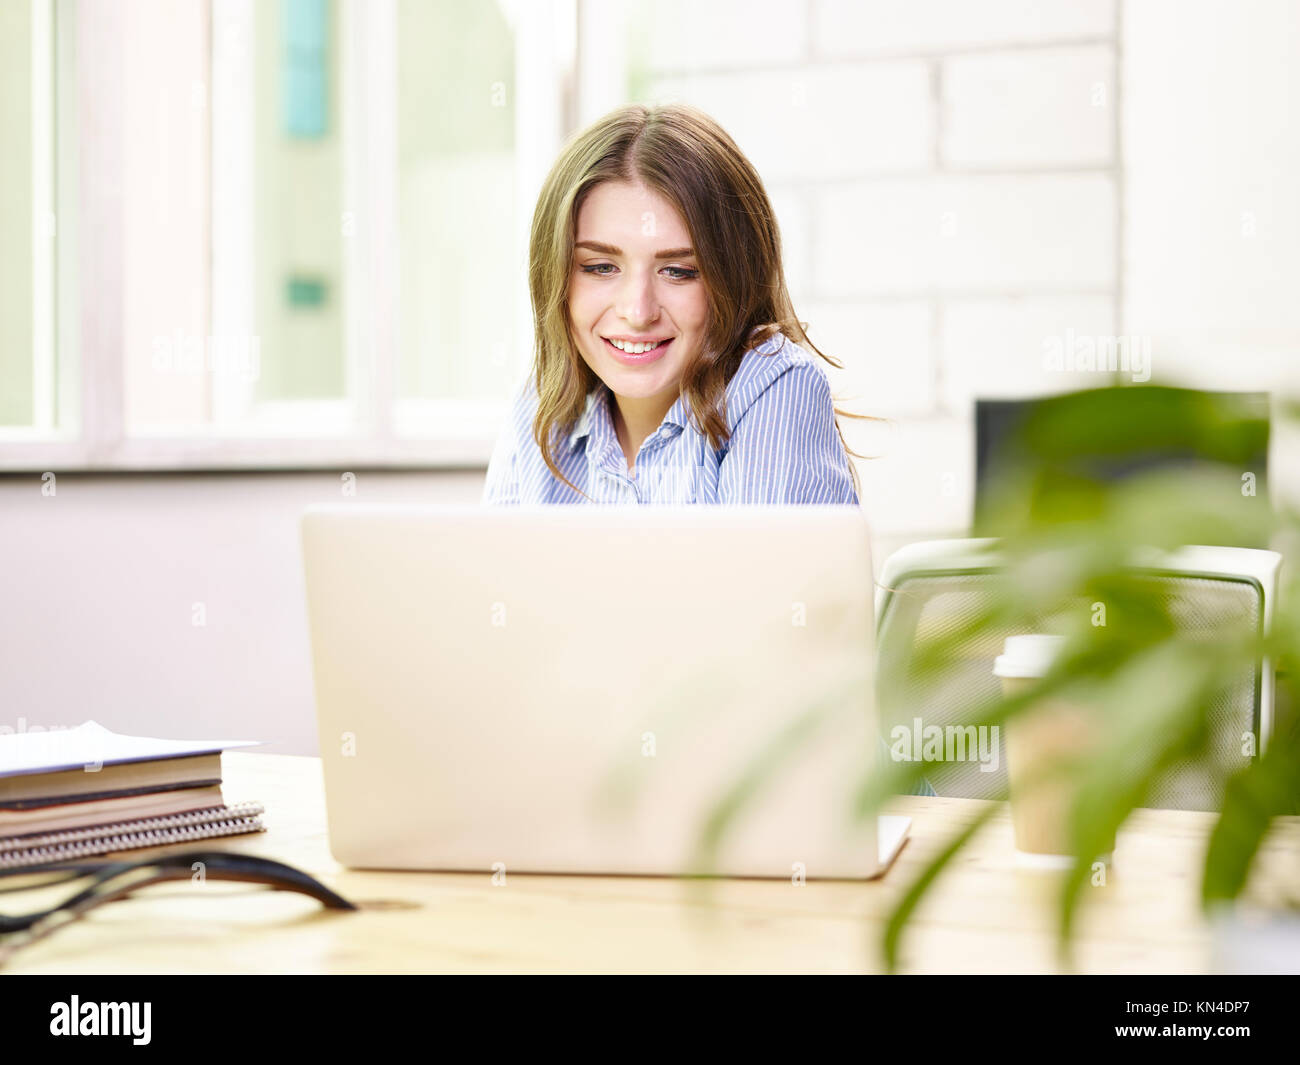 Beau young caucasian business woman working in office using laptop computer, heureux et souriant. Banque D'Images